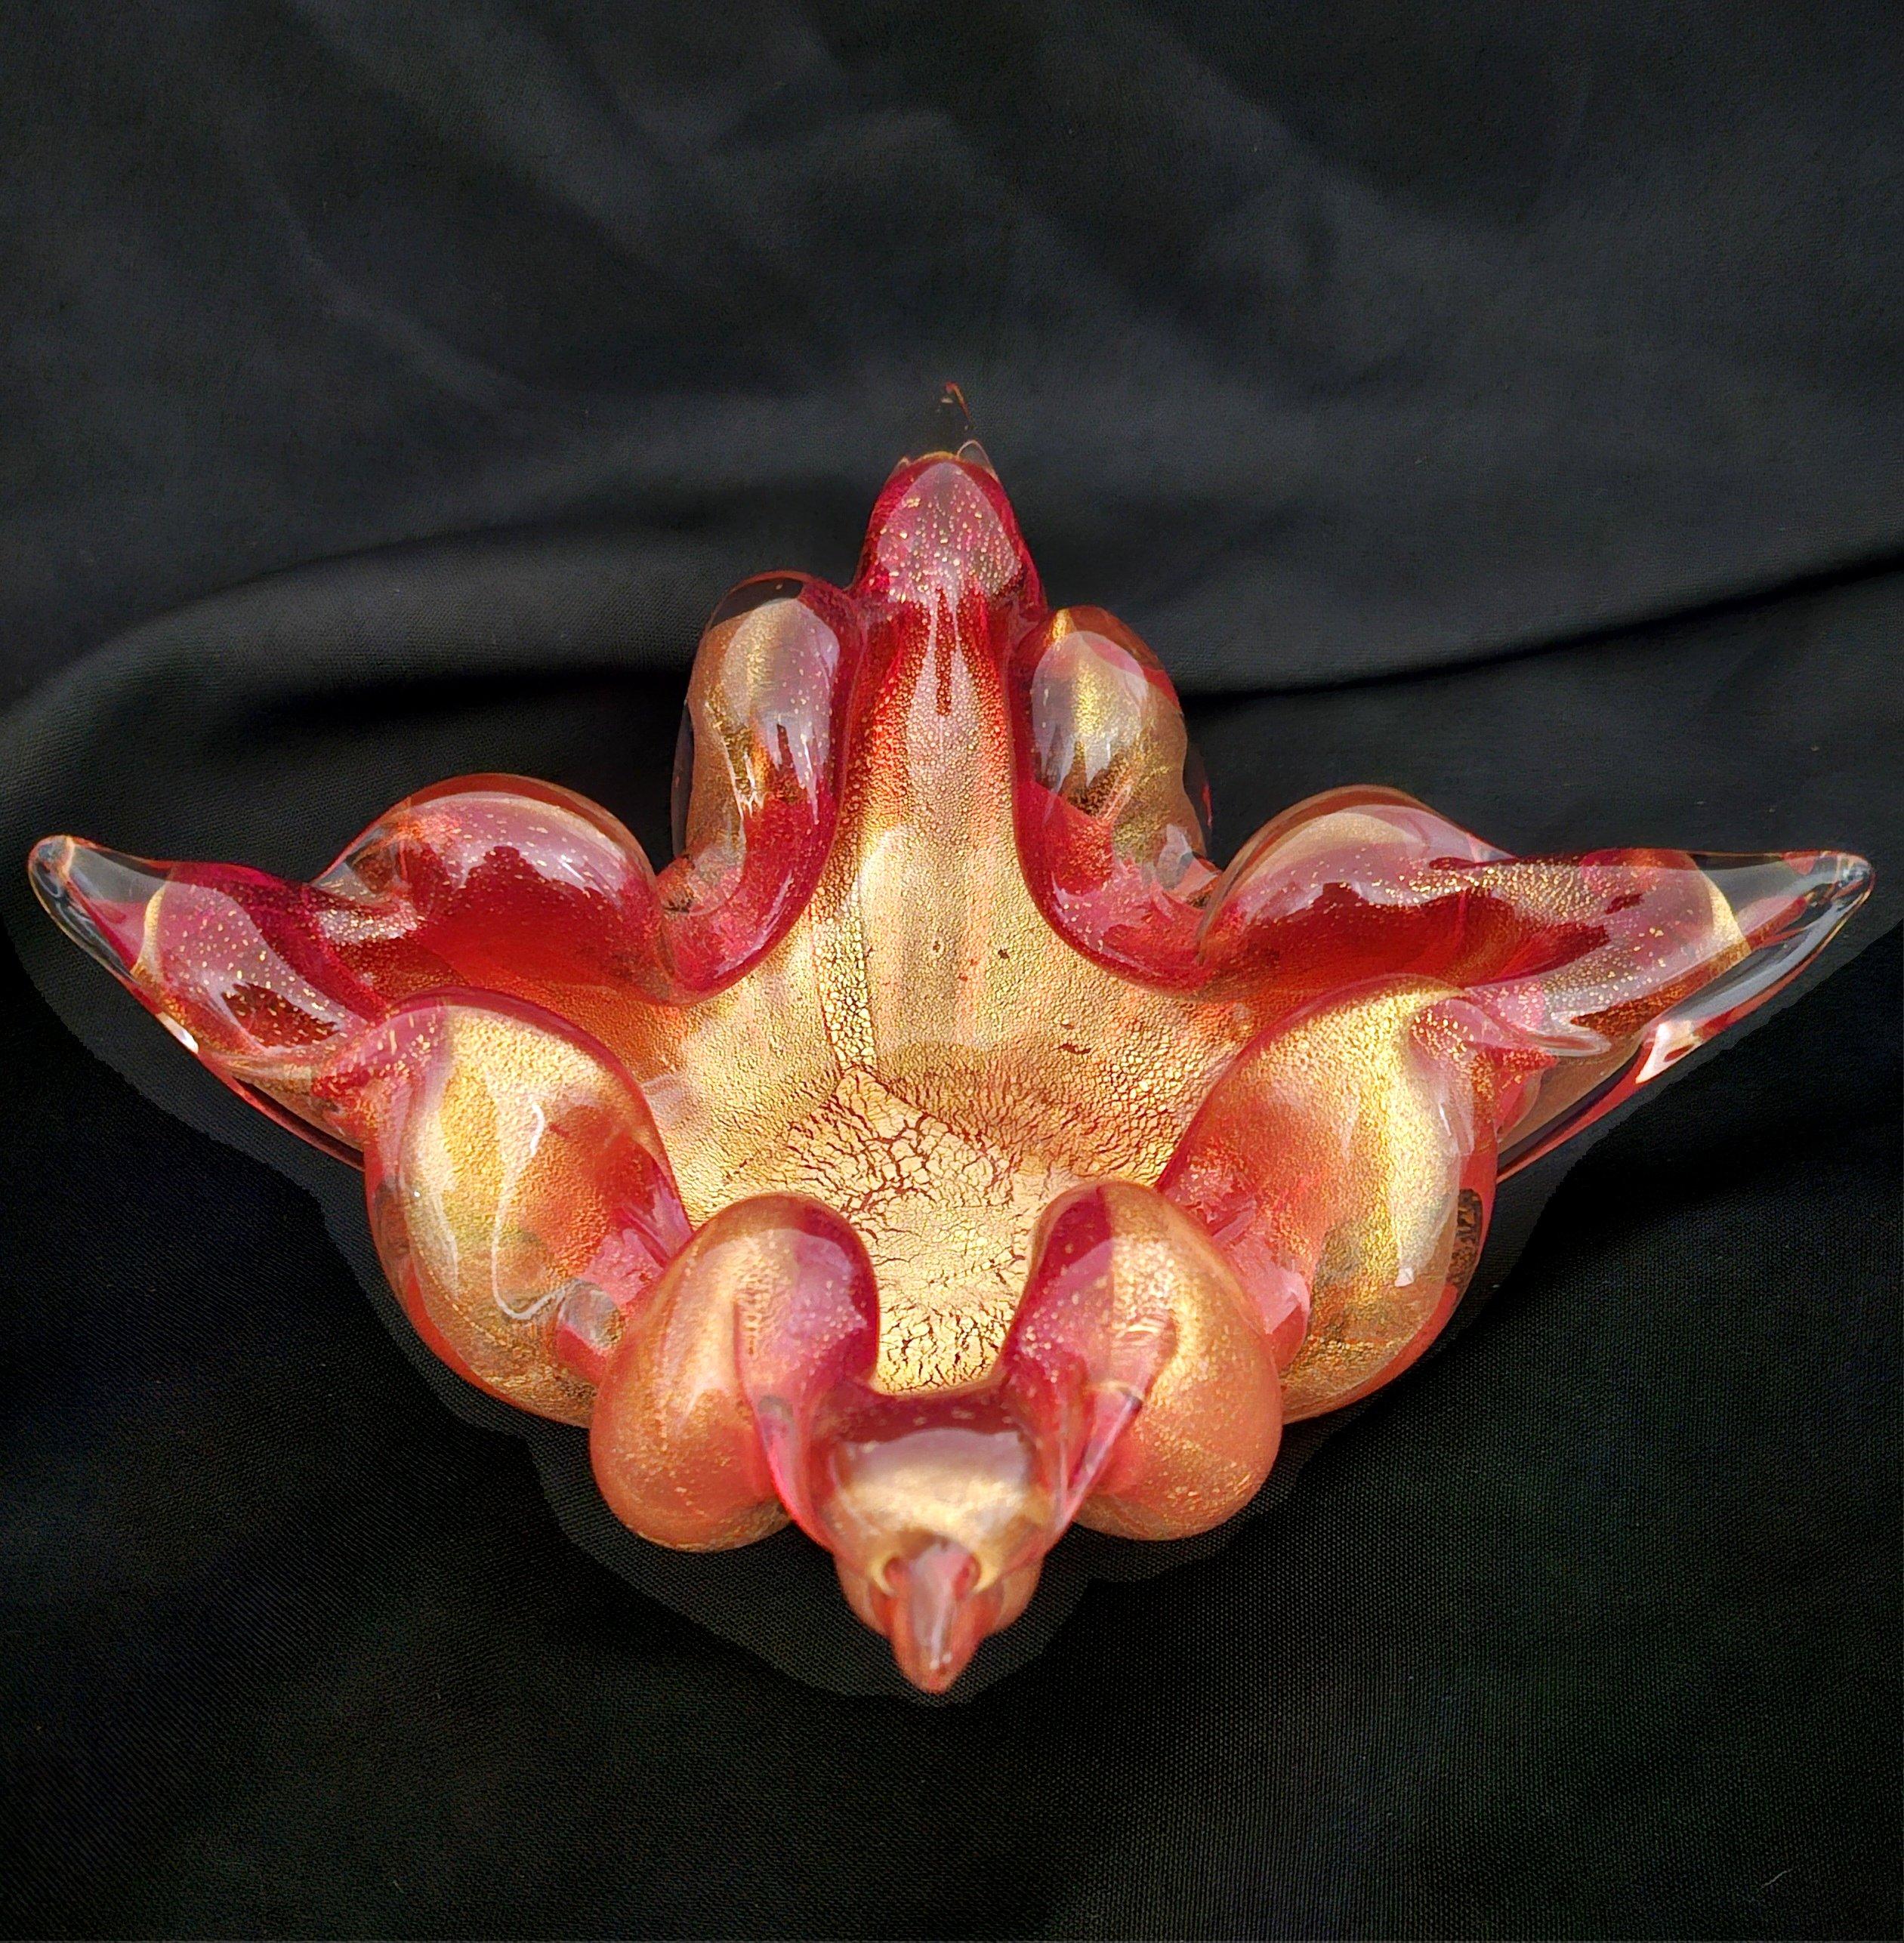 Murano Glass Ashtray, Red w/Gold Polveri / Gold Leaf, Barovier & Toso (assumed)
No chips or cracks. Excellent vintage condition. A rare beauty!
Measures about 8 (point to point) x 5 (side to side) x 3 (height) inches.


Measurements are approximate